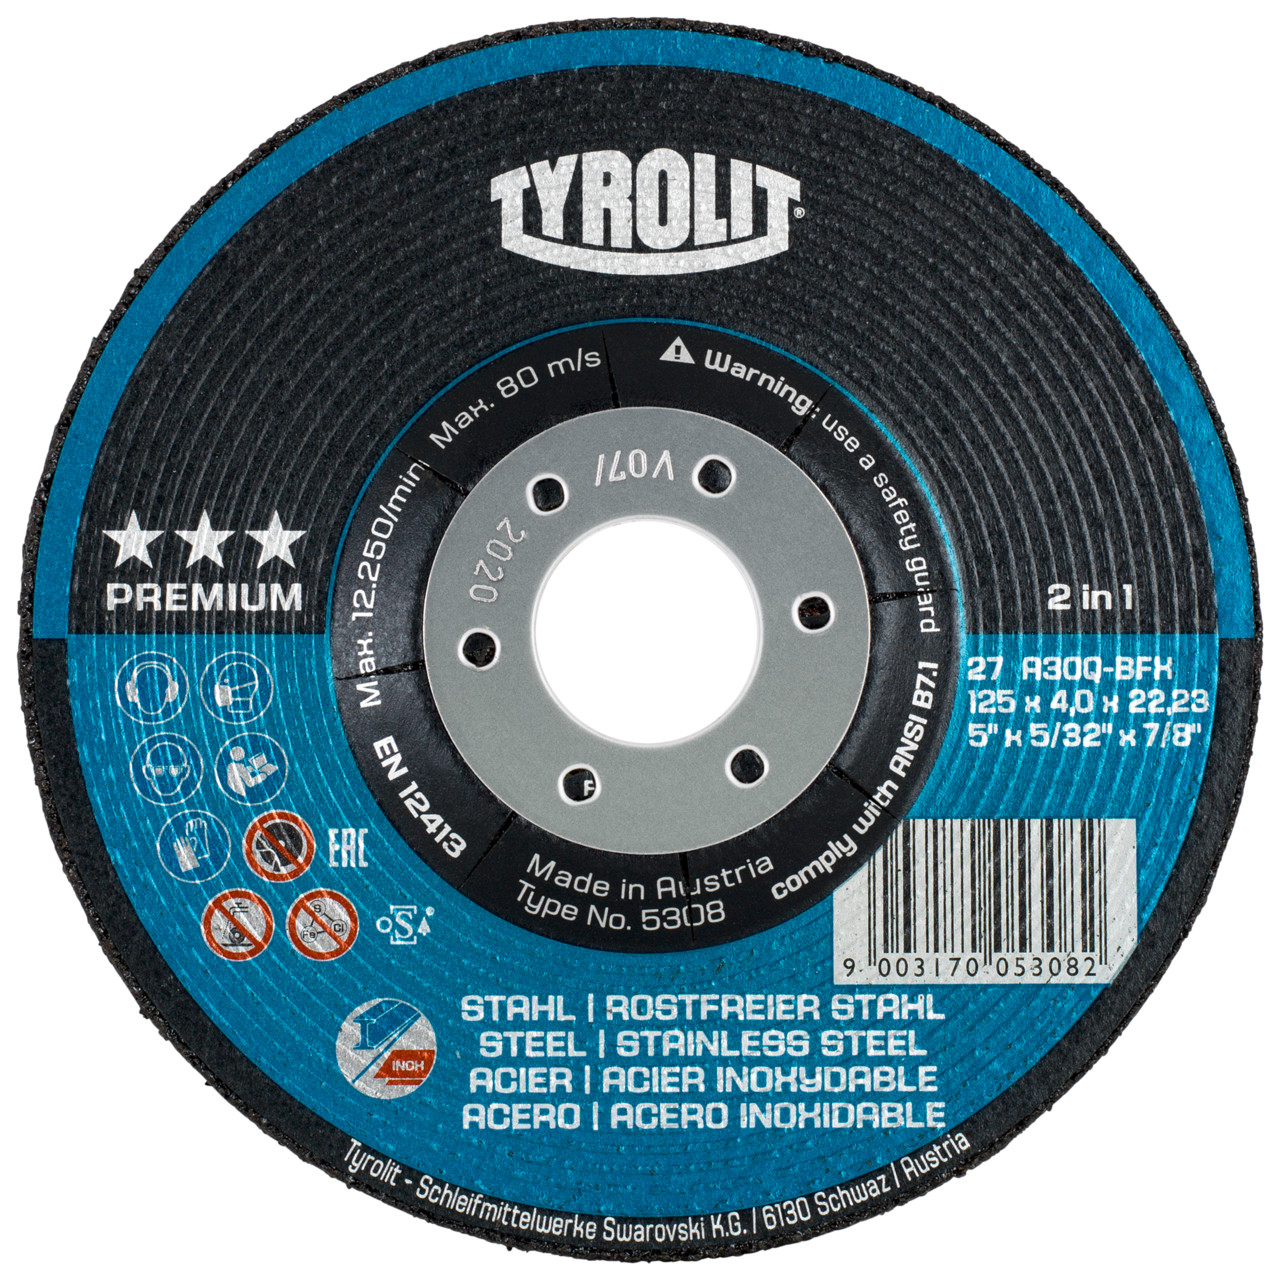 TYROLIT grinding wheel DxUxH 115x7x22.23 2in1 for steel and stainless steel, shape: 27 - offset version, Art. 34046120